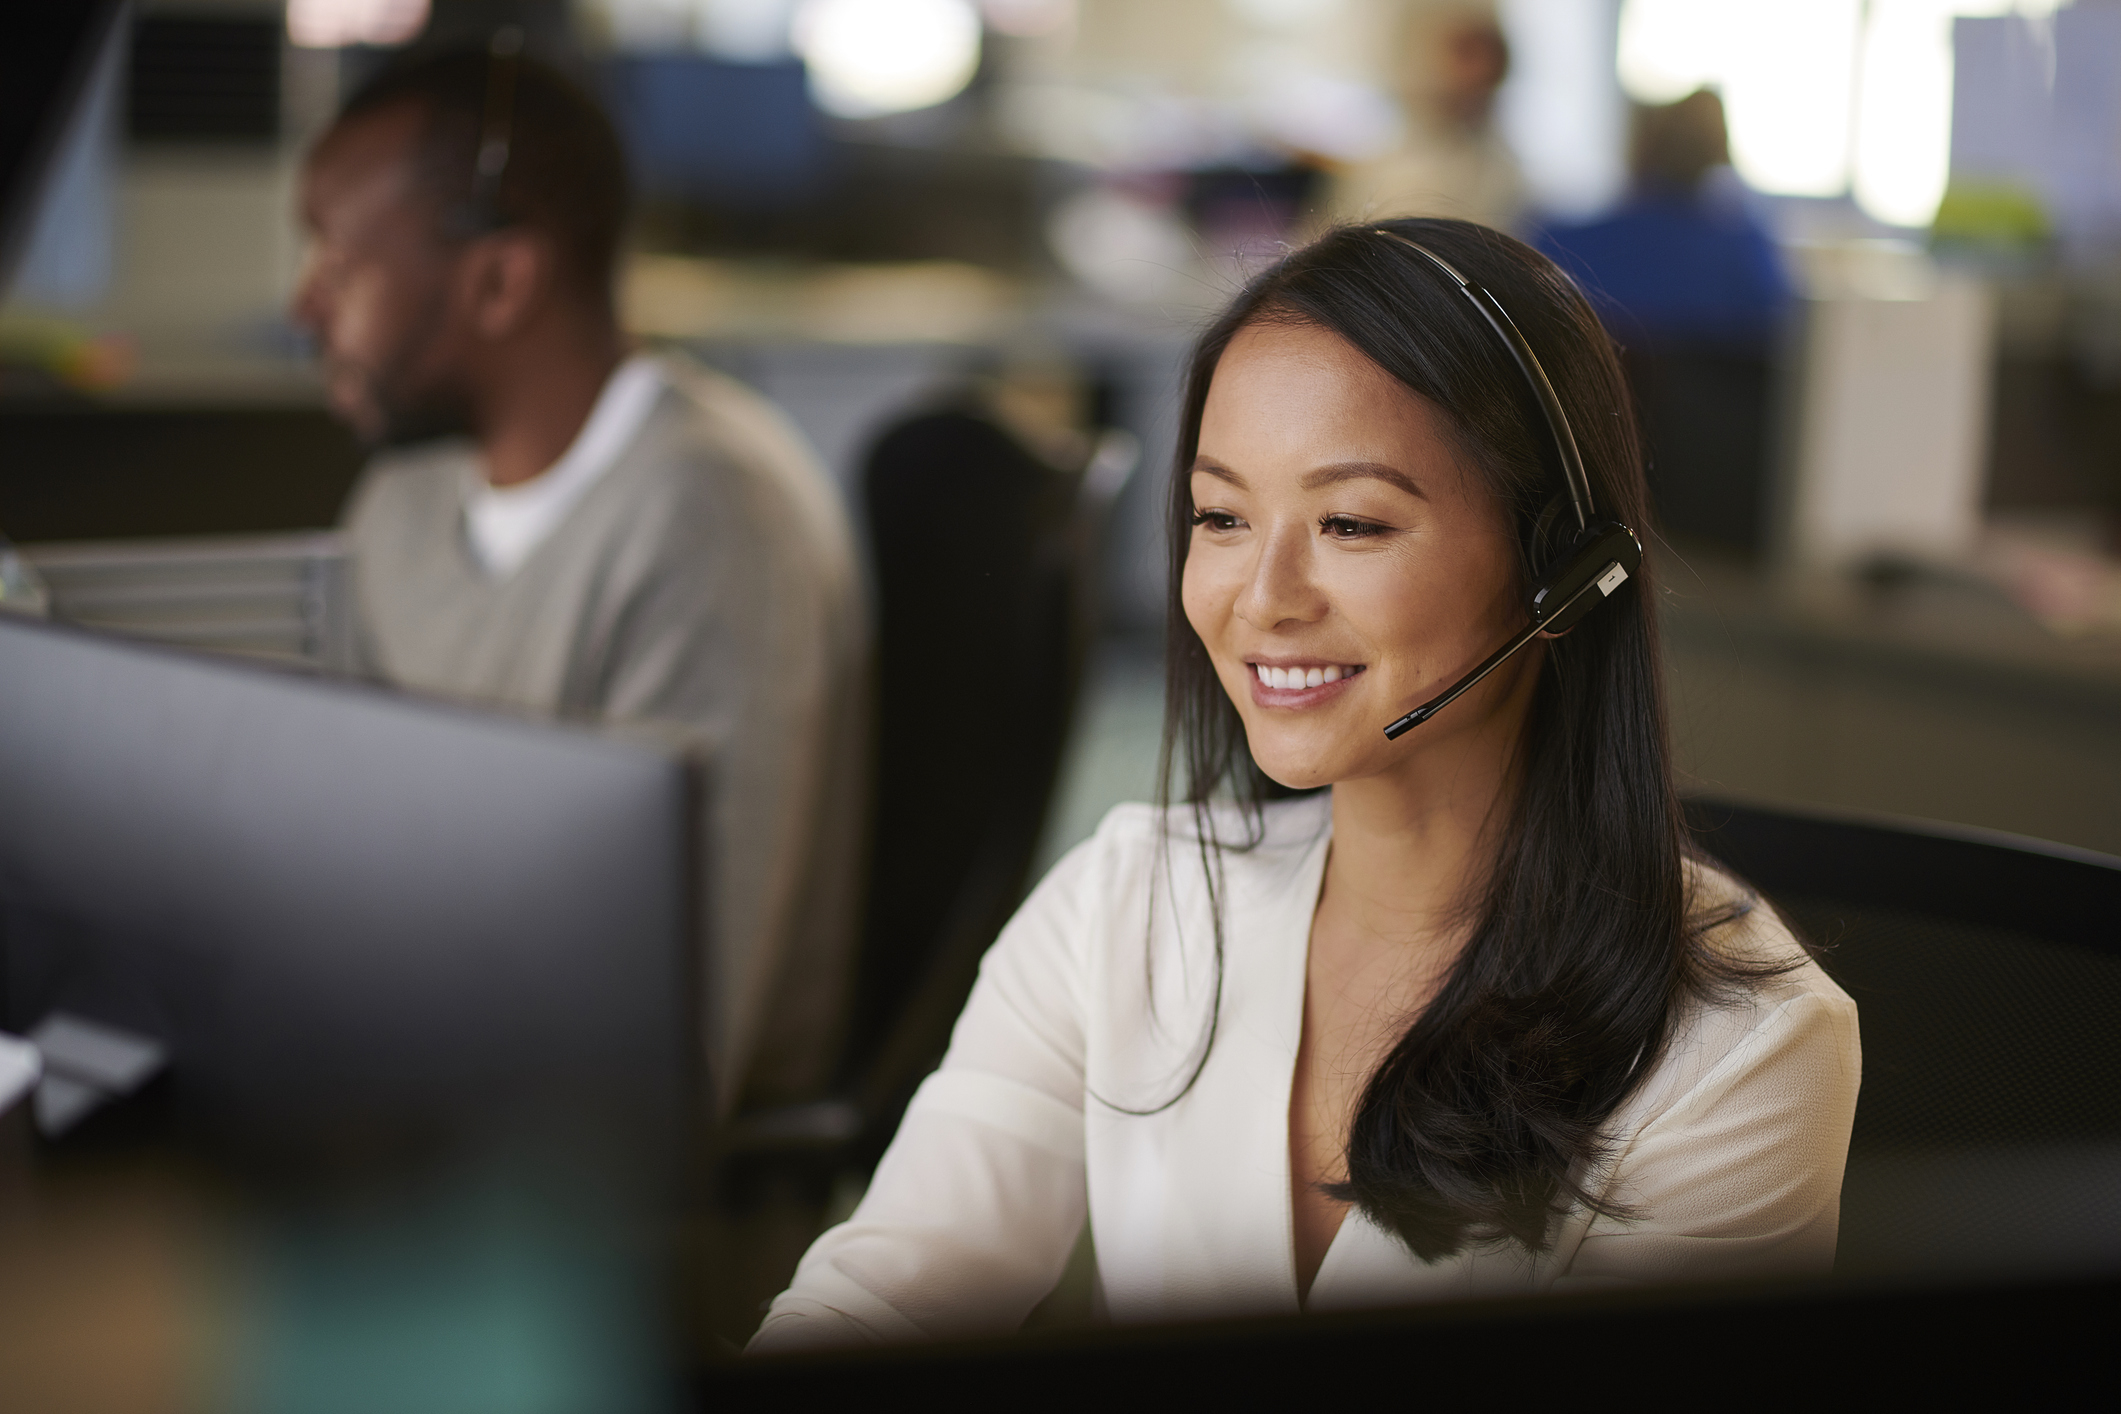 Woman in headset smiling at desk, representing customer service in a modern workplace setting